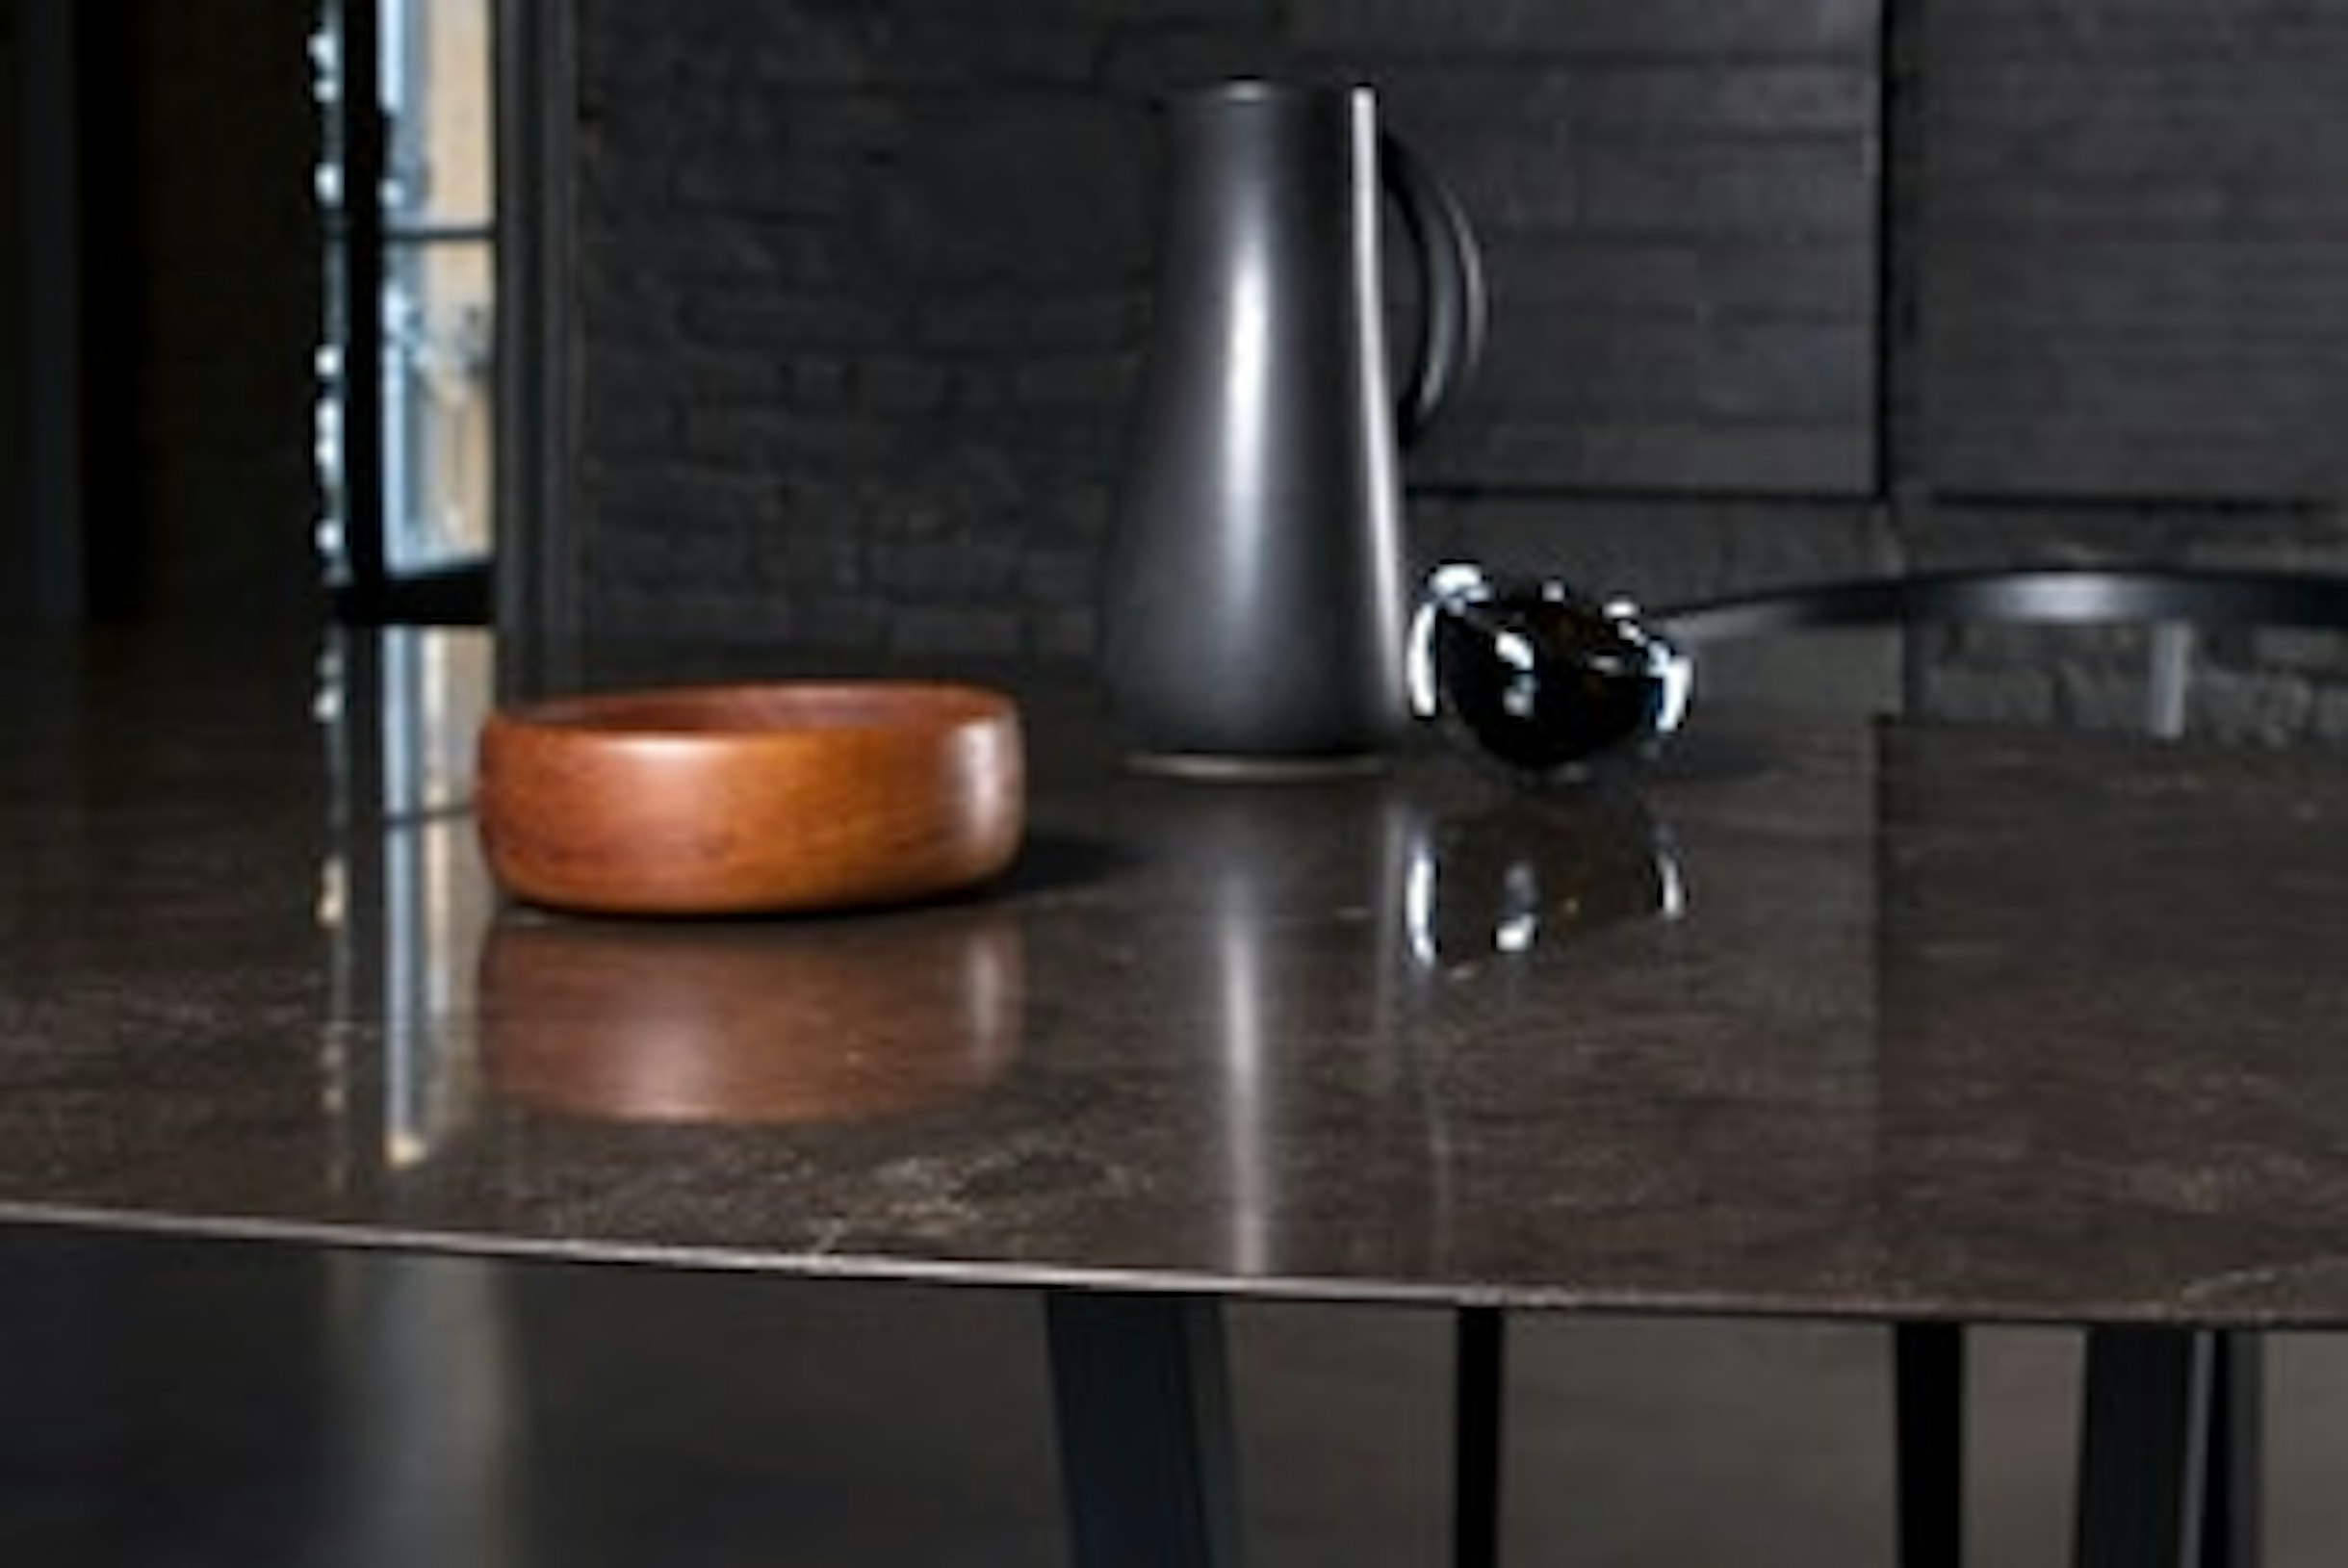 Product description-raw2-Dritto dining table